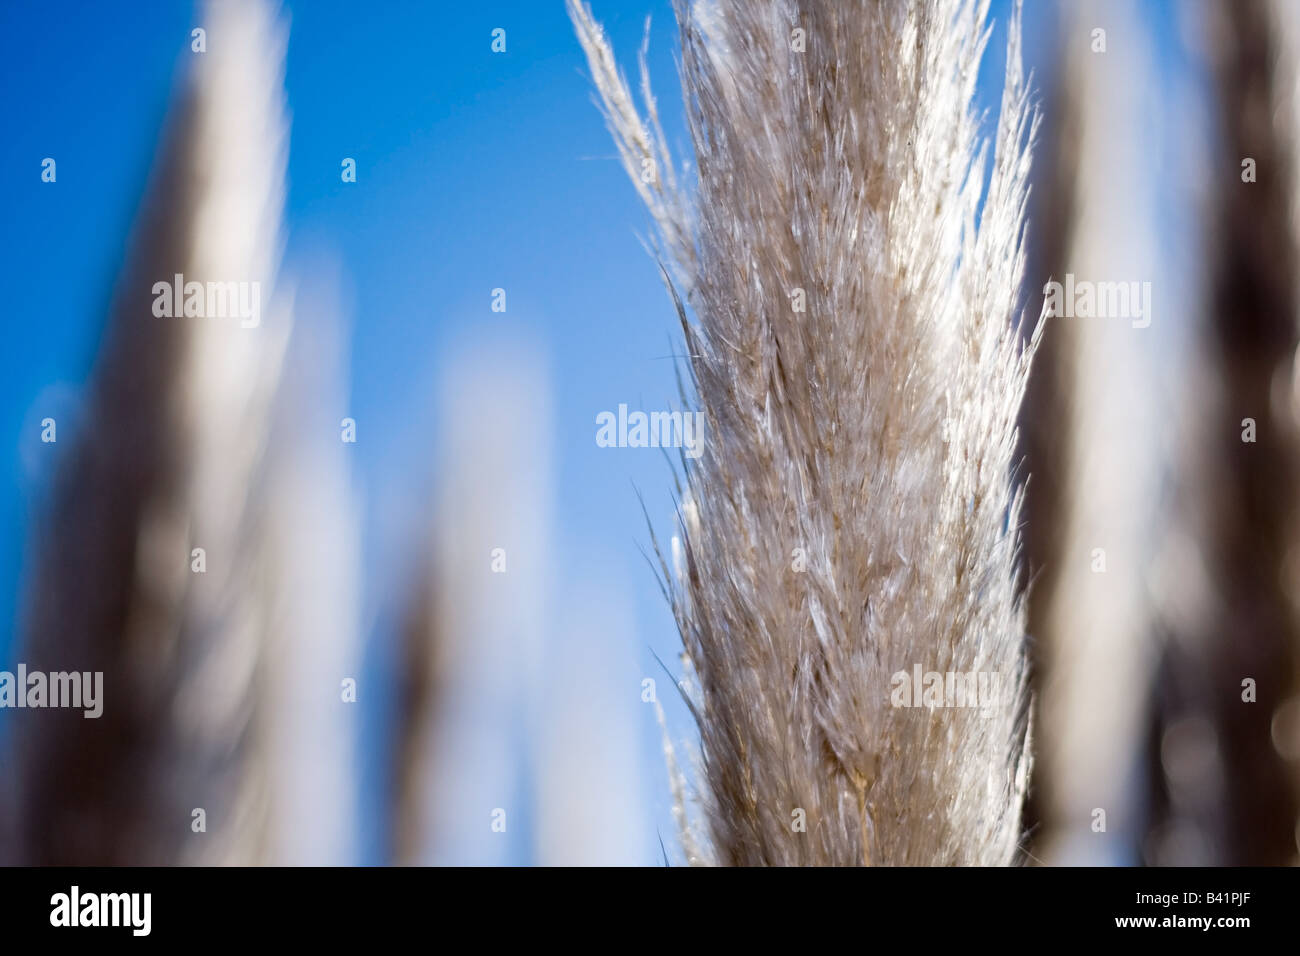 A close up photo of some pampas grass seed heads. Stock Photo